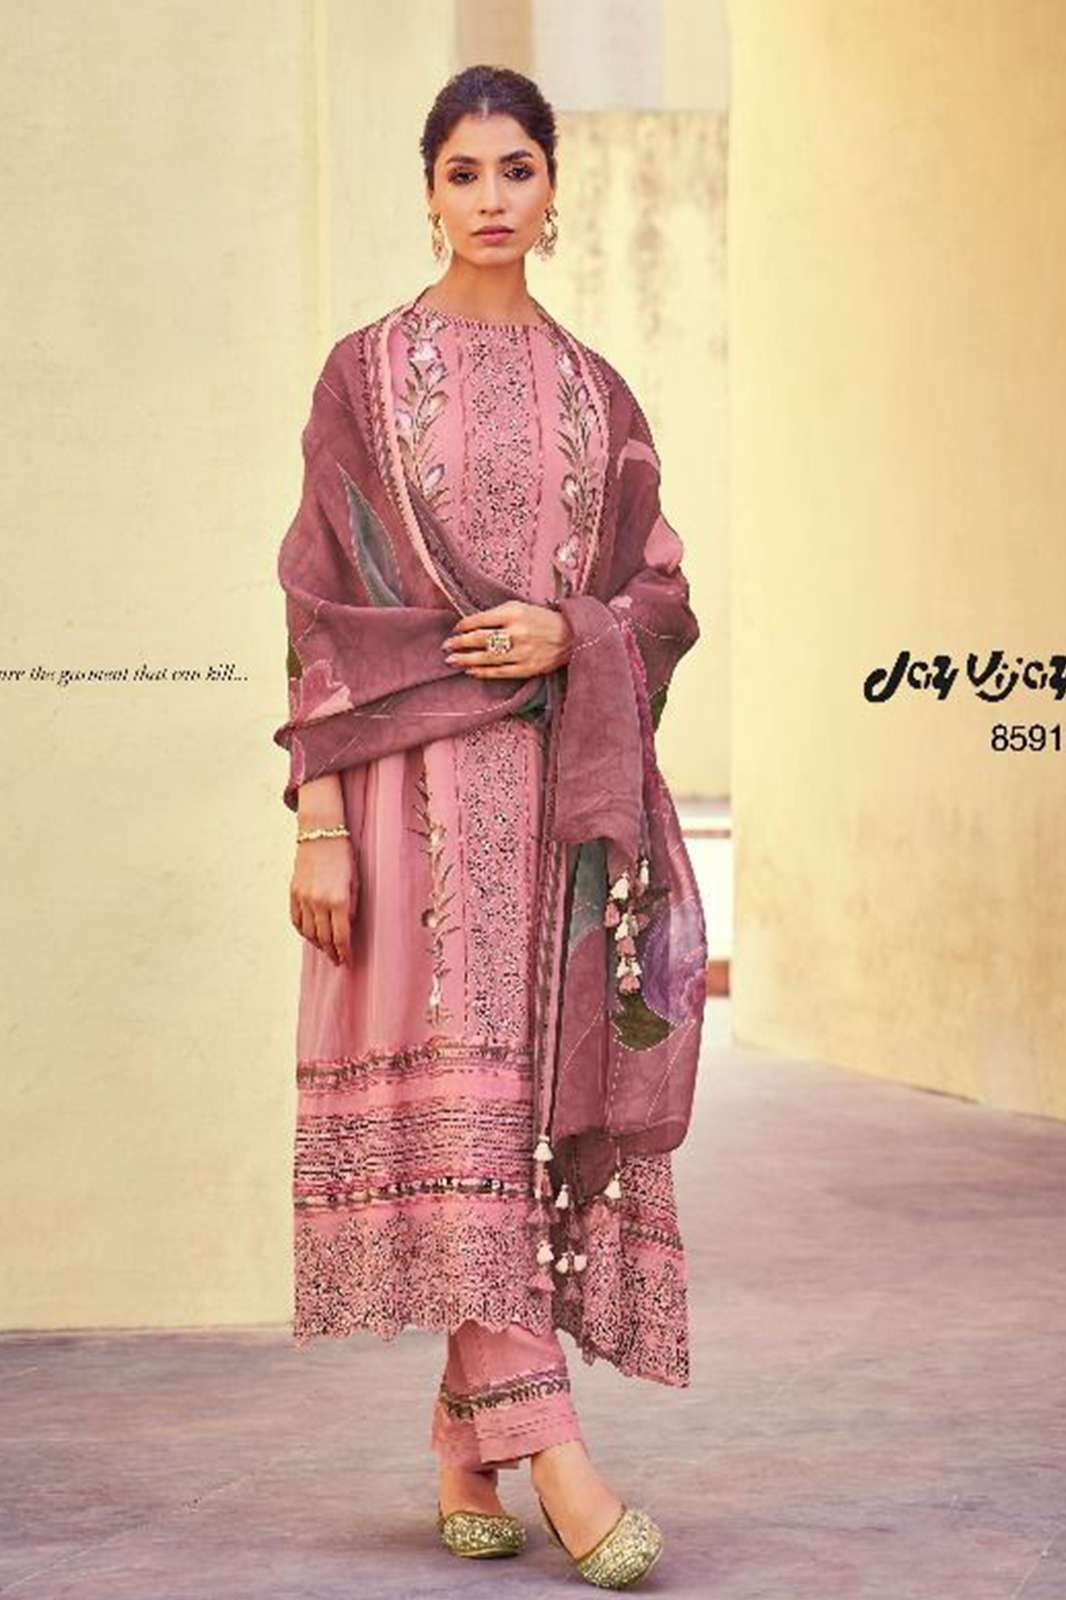 Heer JayVijay PURE ORGENZA WITH BRUSH PAINT AND FANCY PLACEMENT EMBROIDERY SUIT